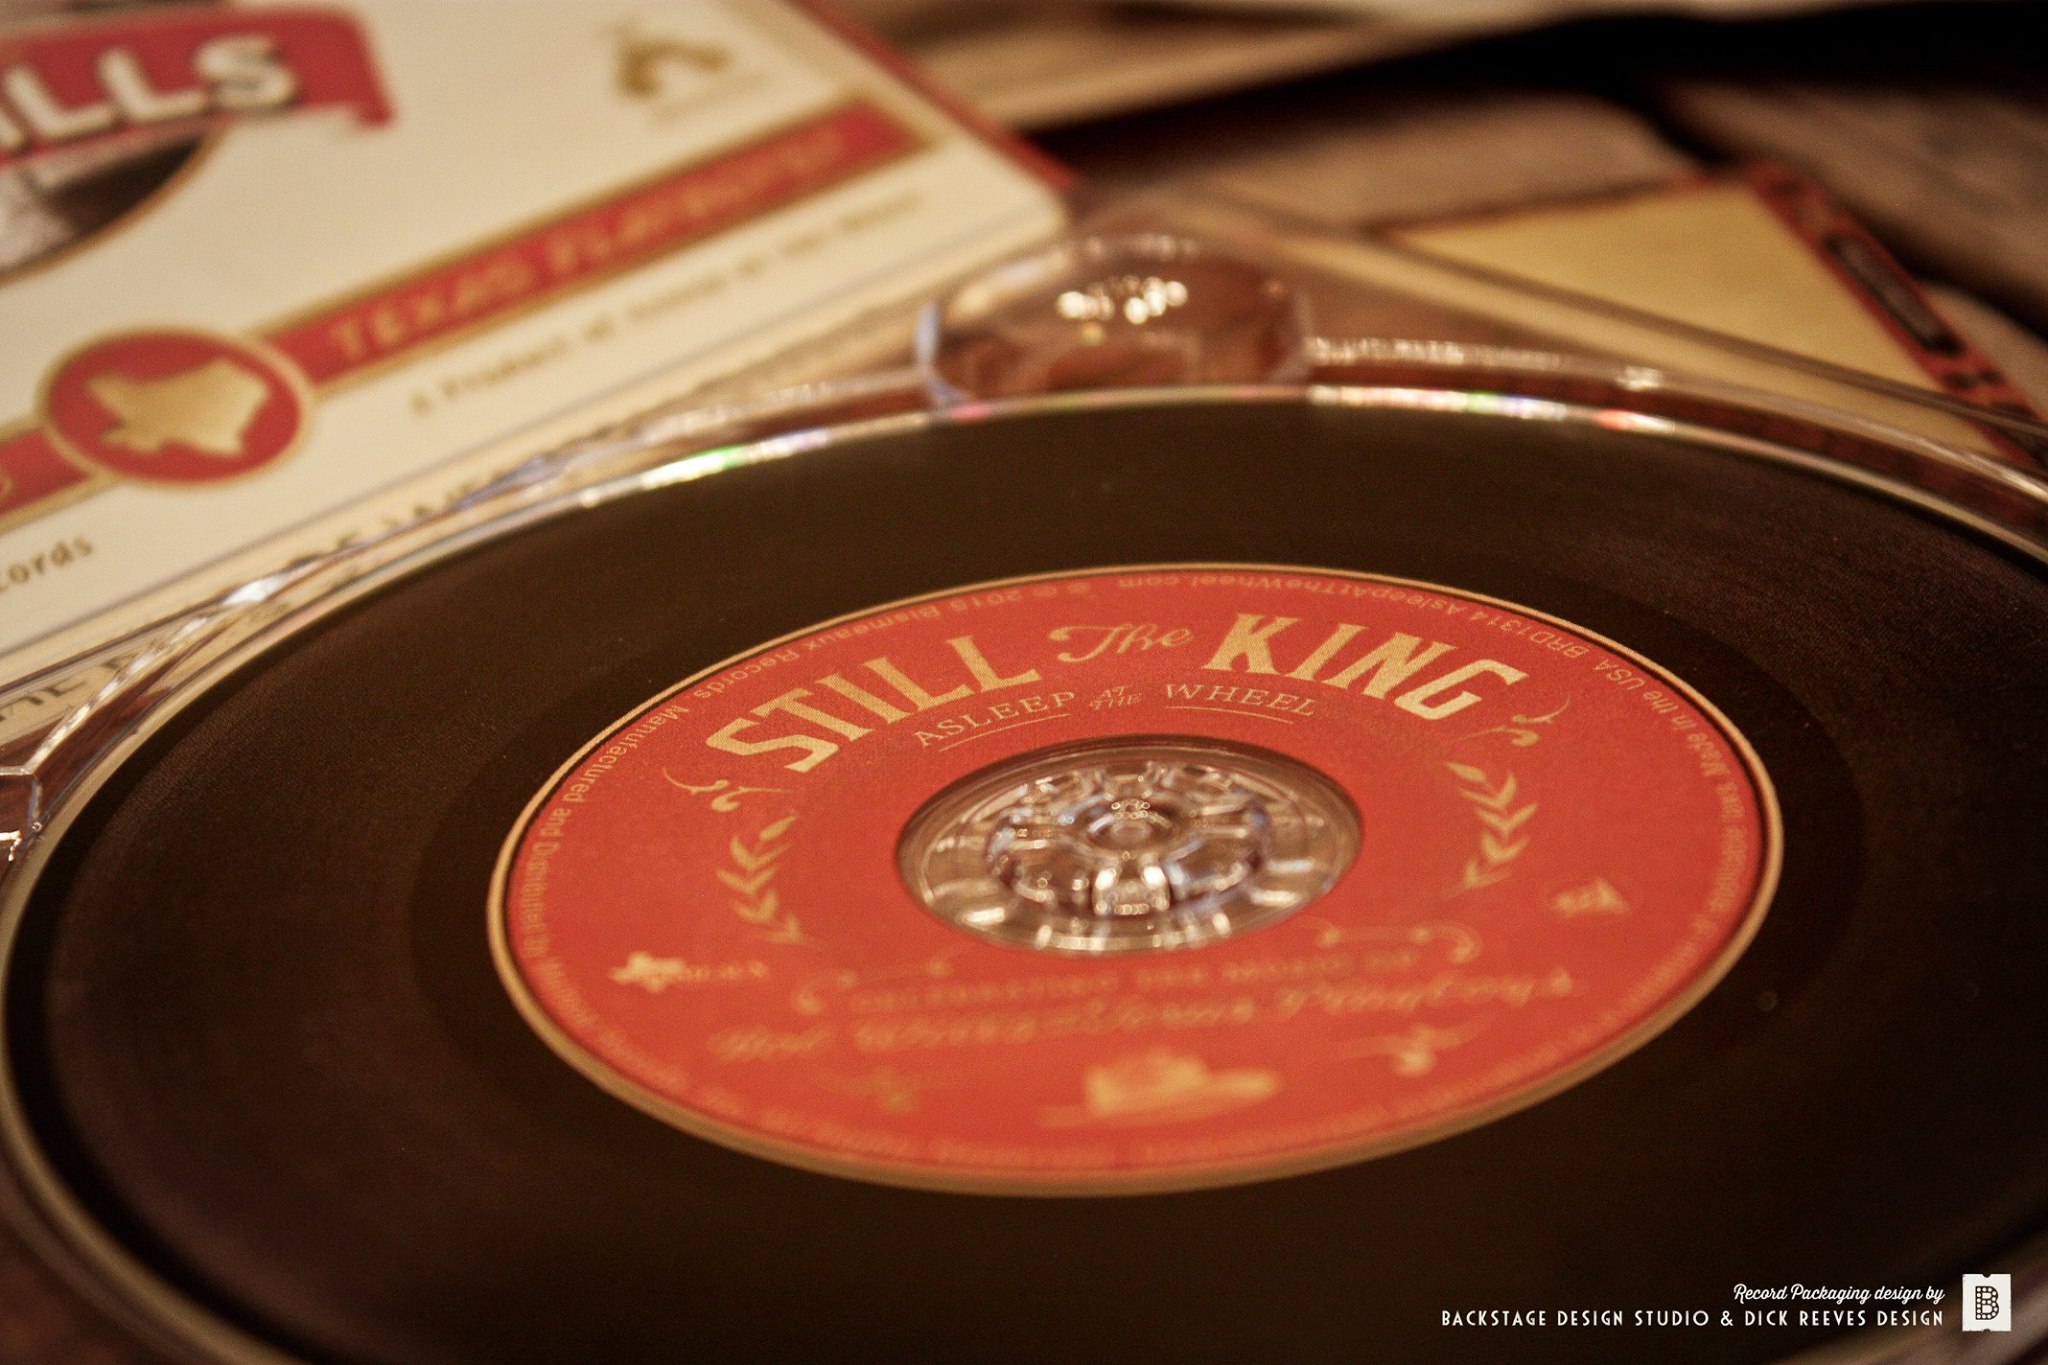 Best Recording Package Nominee - Grammys - Still the King - Asleep at the Wheel